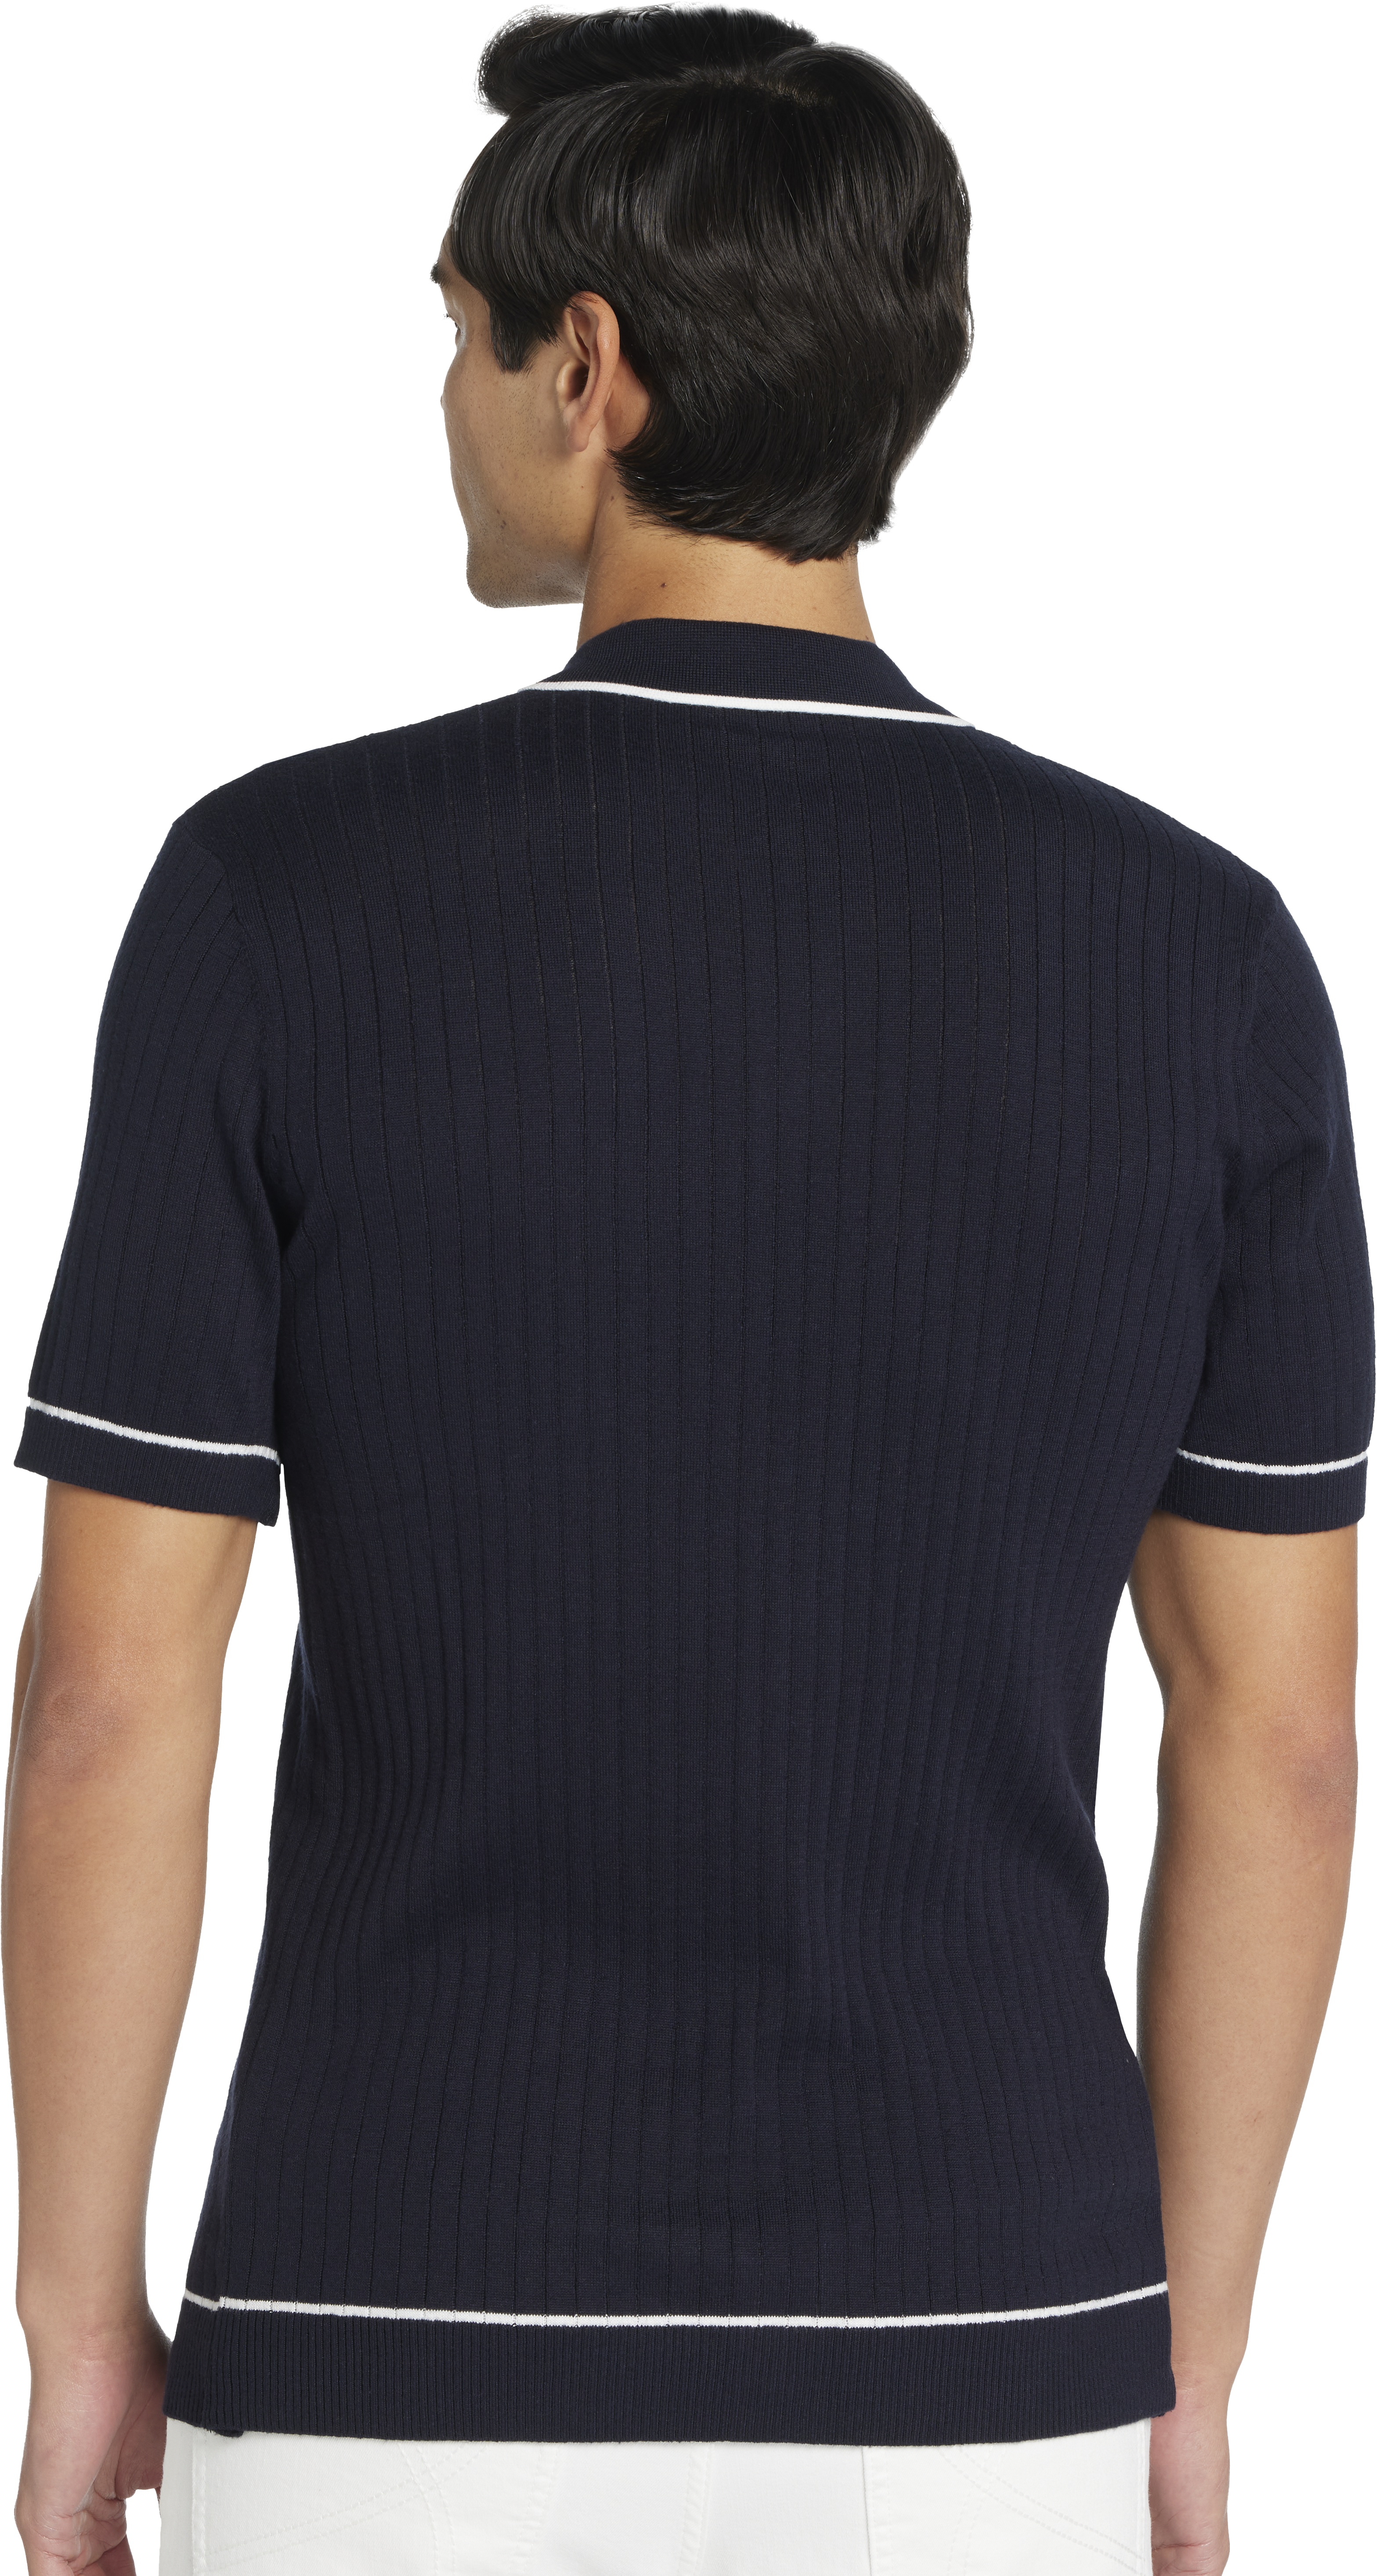 Slim Fit Tipped Knit Polo Shirt